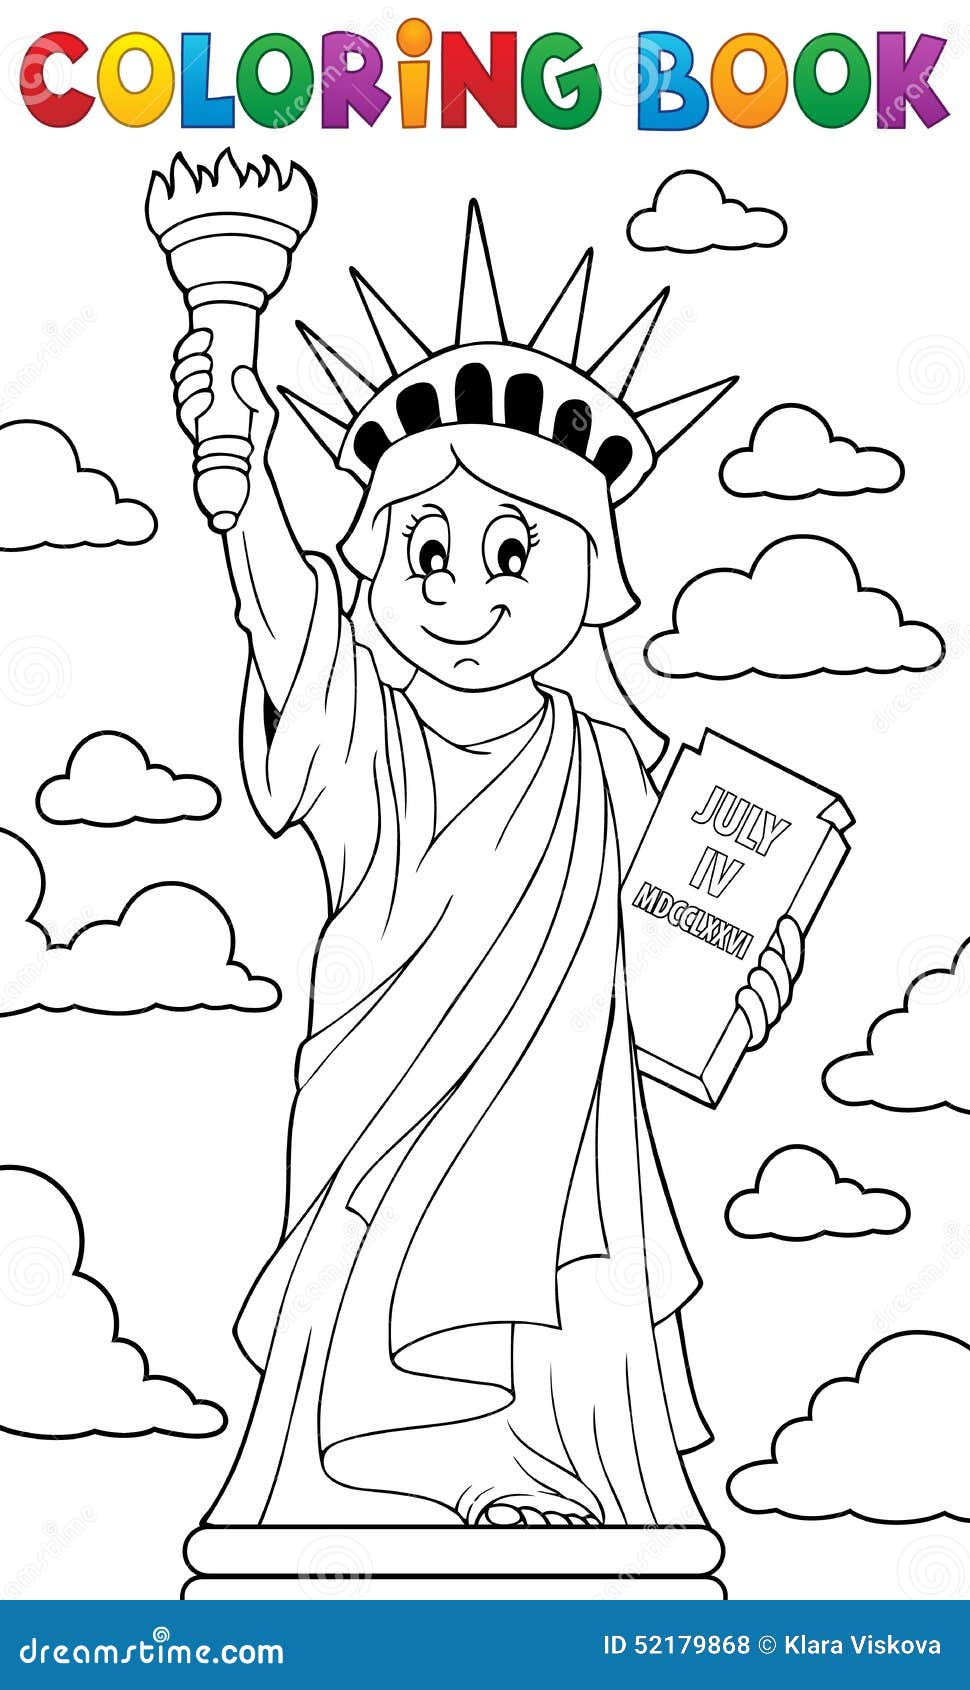 Coloring Book Statue Of Liberty Theme 1 Stock Vector - Image: 52179868